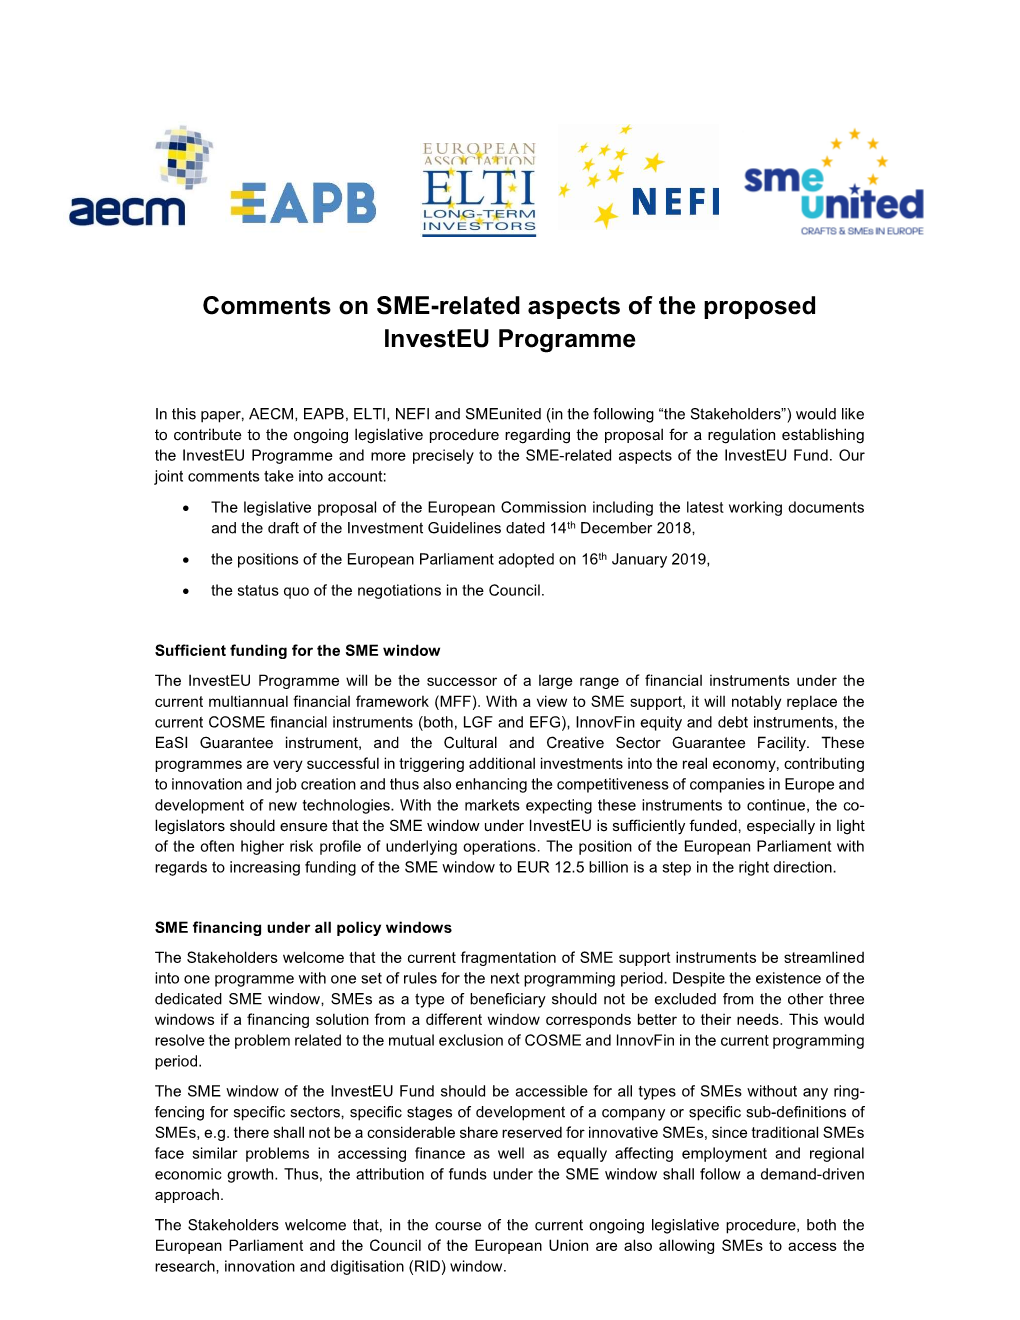 Comments on SME-Related Aspects of the Proposed Investeu Programme